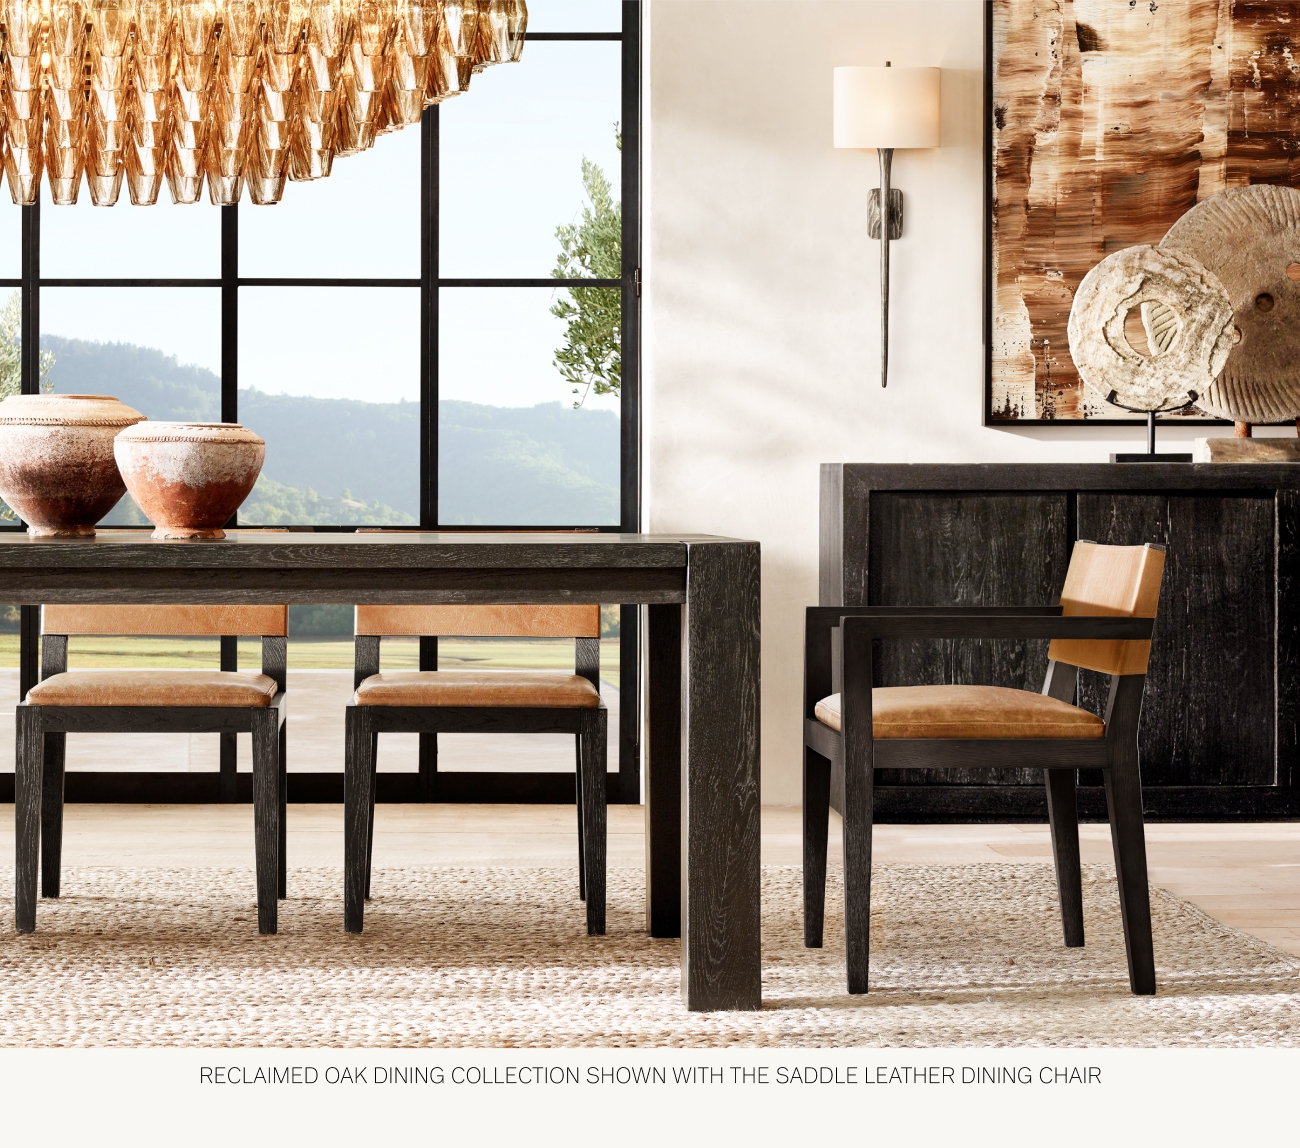  RECLAIMED OAK DINING COLLECTION SHOWN WITH THE SADDLE LEATHER DINING CHAIR 